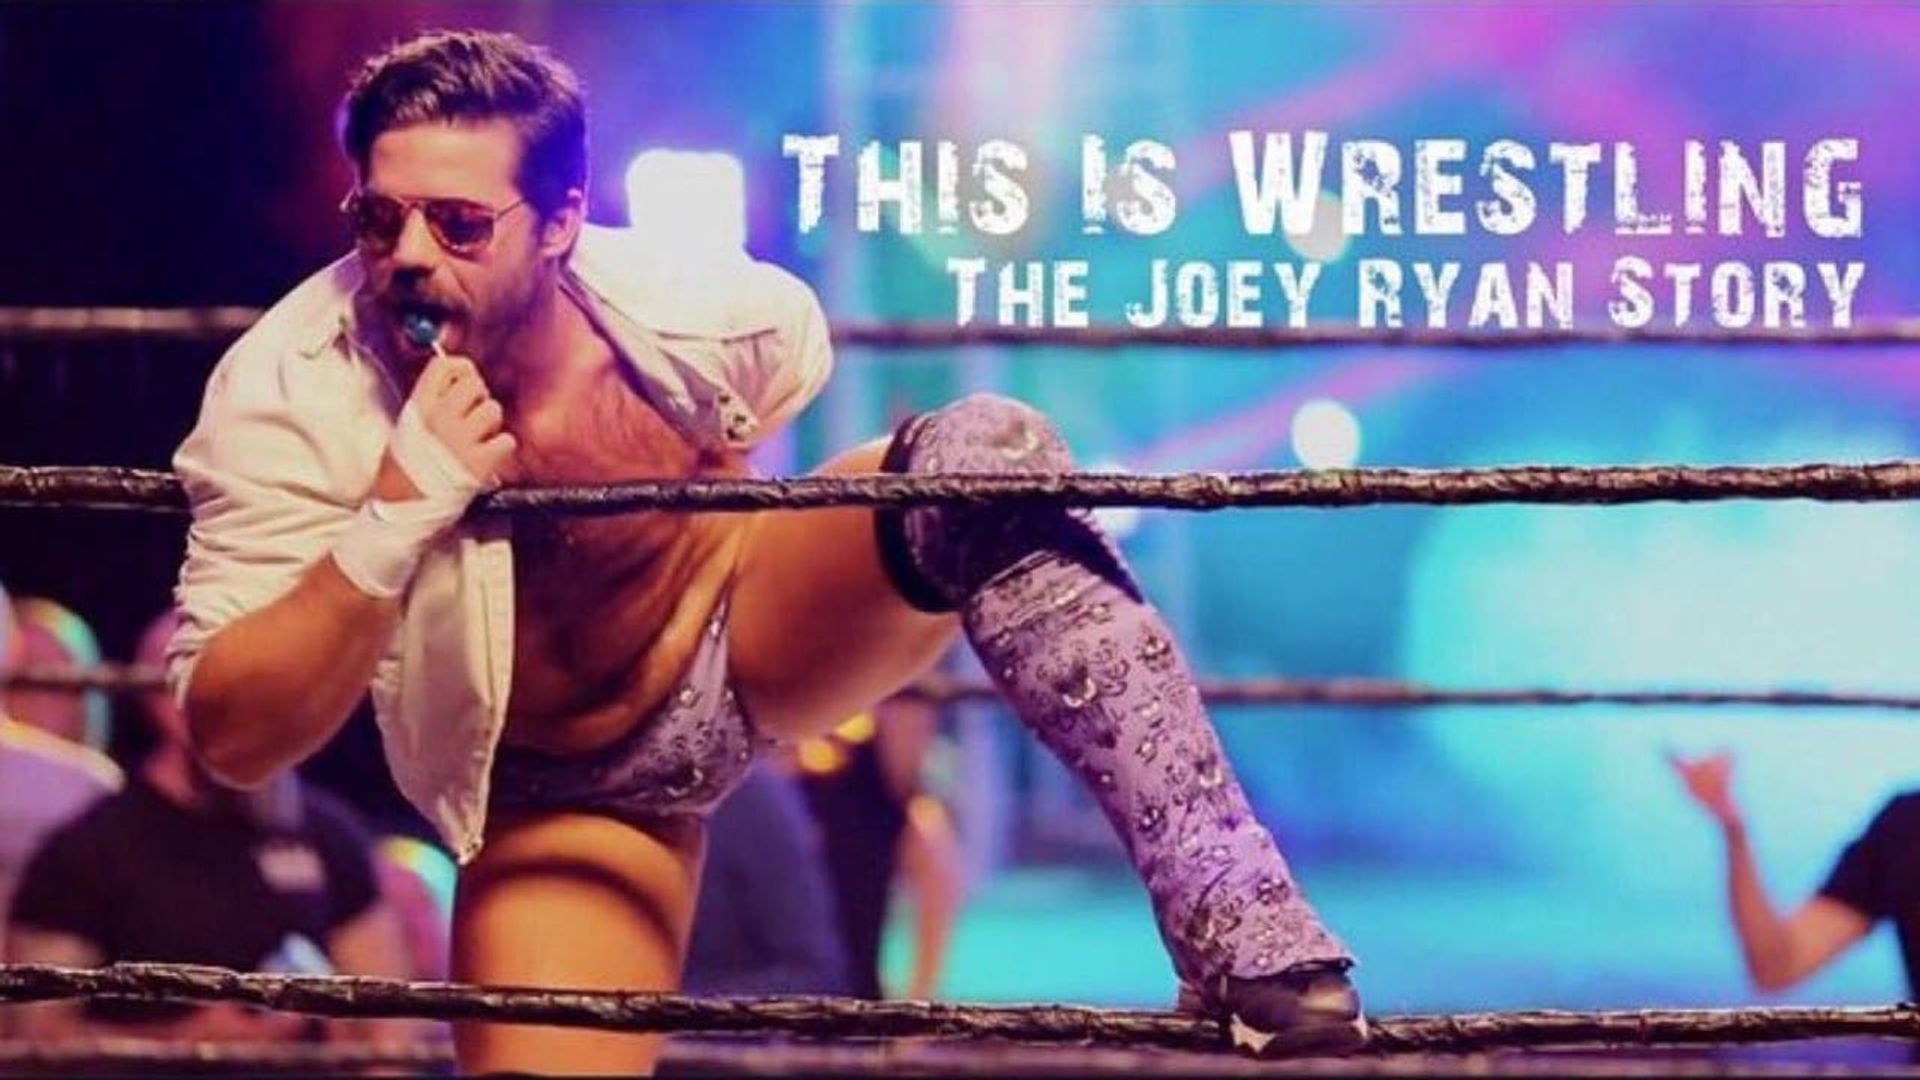 This Is Wrestling: The Joey Ryan Story background